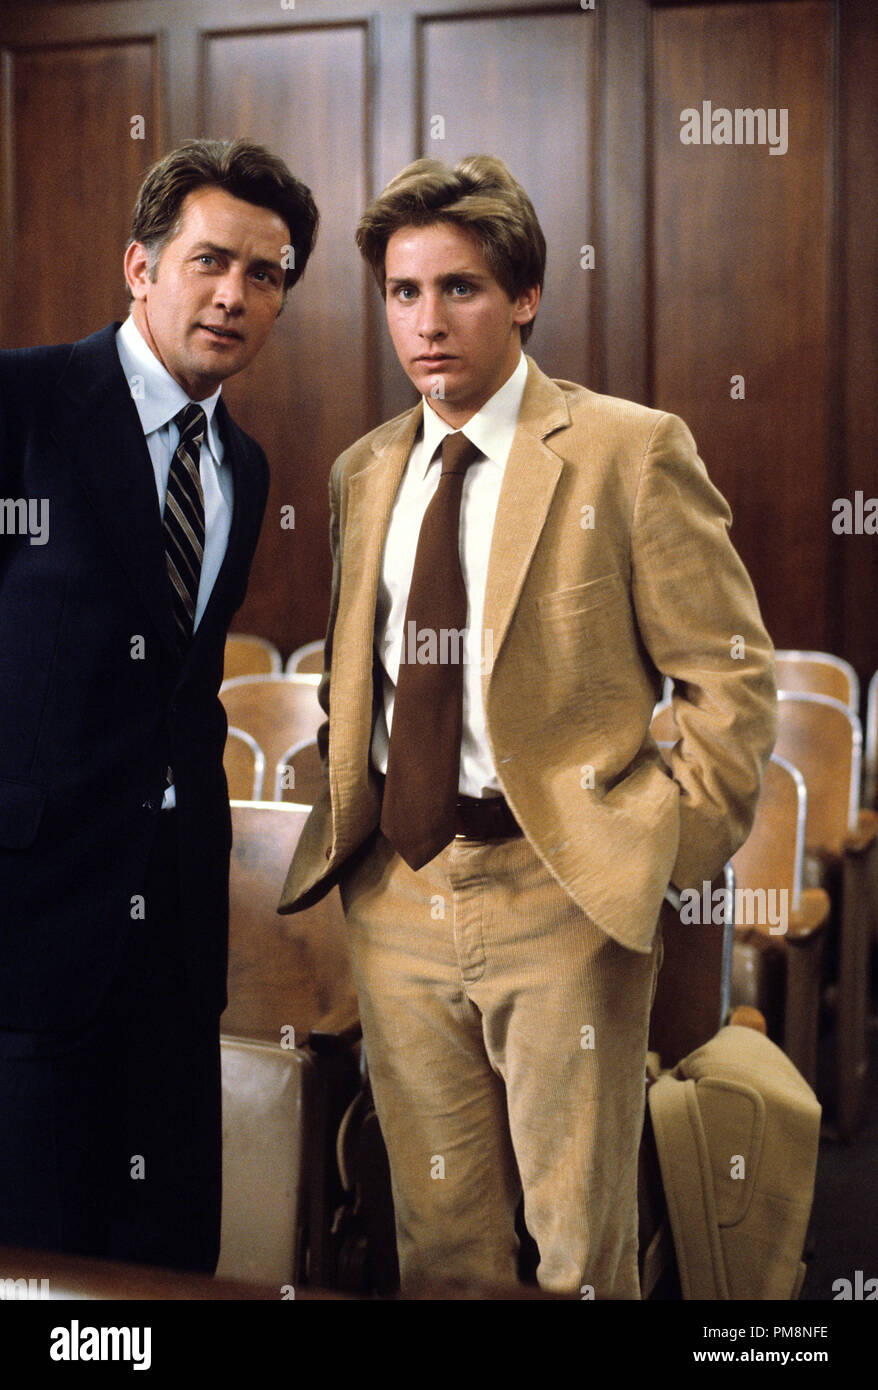 Studio Publicity Still from 'In the Custody of Strangers' Martin Sheen, Emilio Estevez 1982  All Rights Reserved   File Reference # 31710176THA  For Editorial Use Only Stock Photo